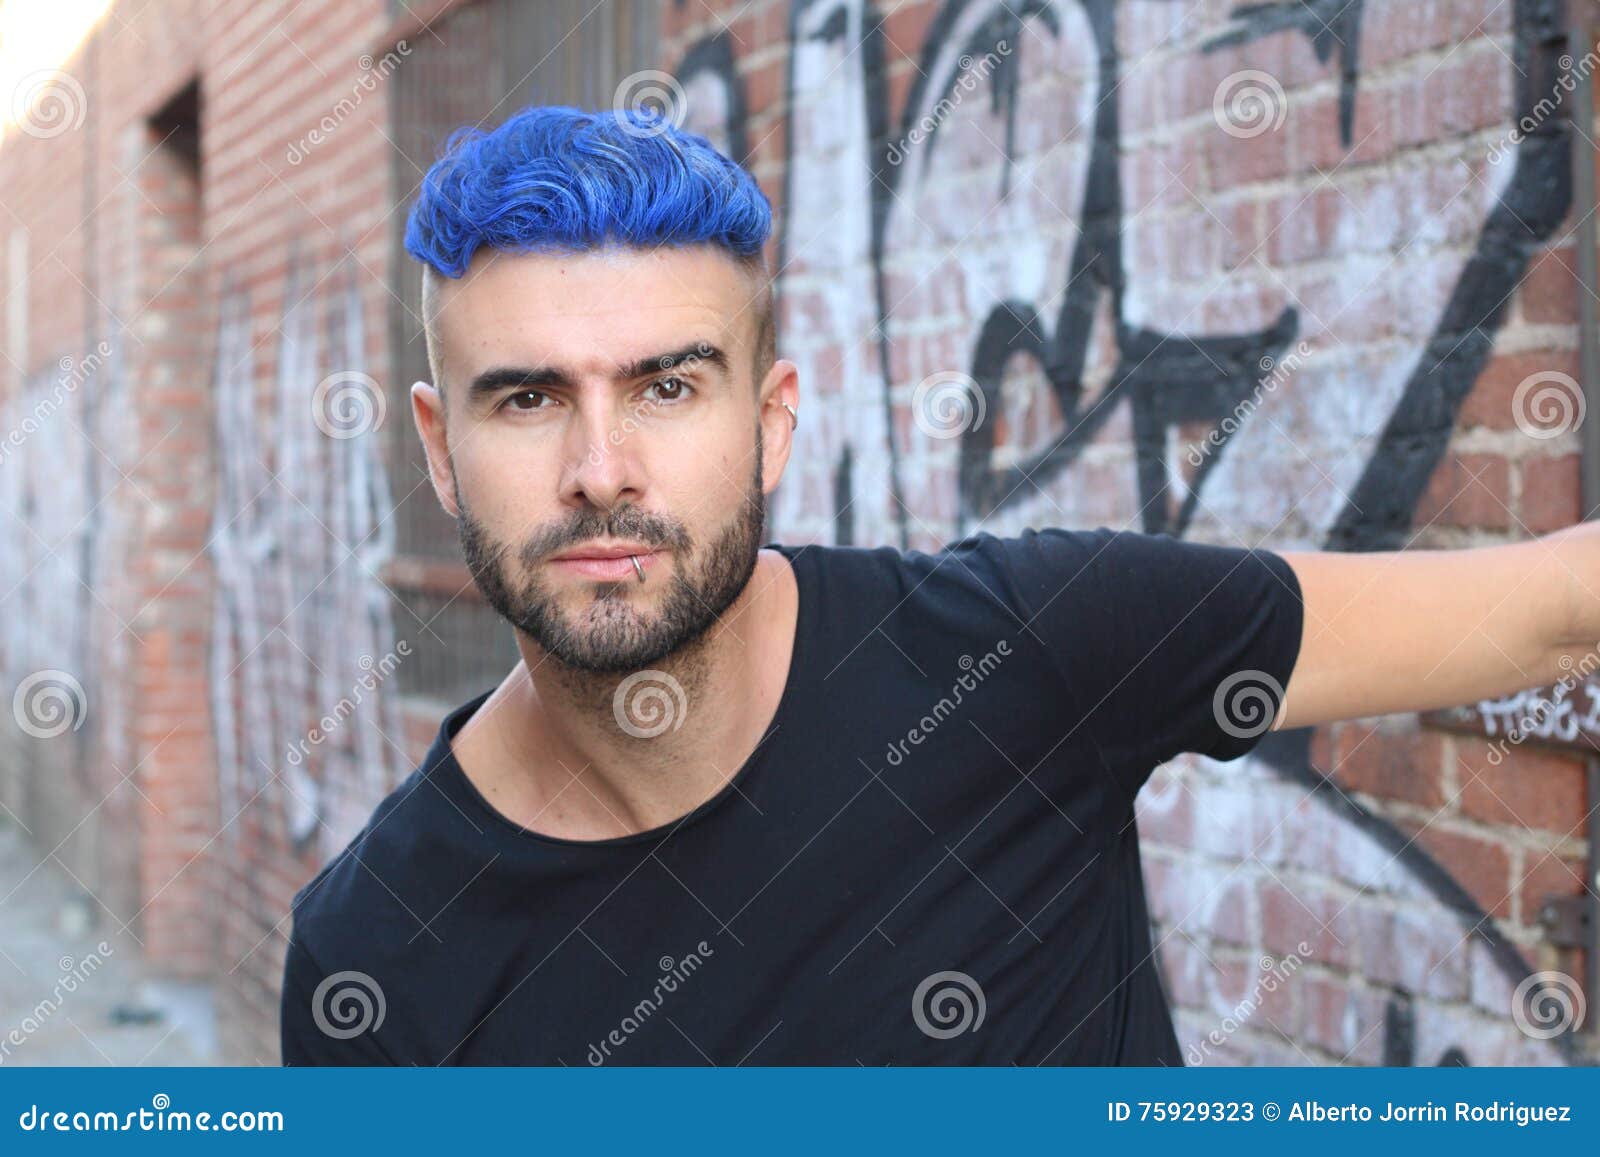 Close-up Portrait of a Beautiful Young Man with Blue Hair. Men S Beauty,  Fashion. Stock Image - Image of people, outdoor: 75929323